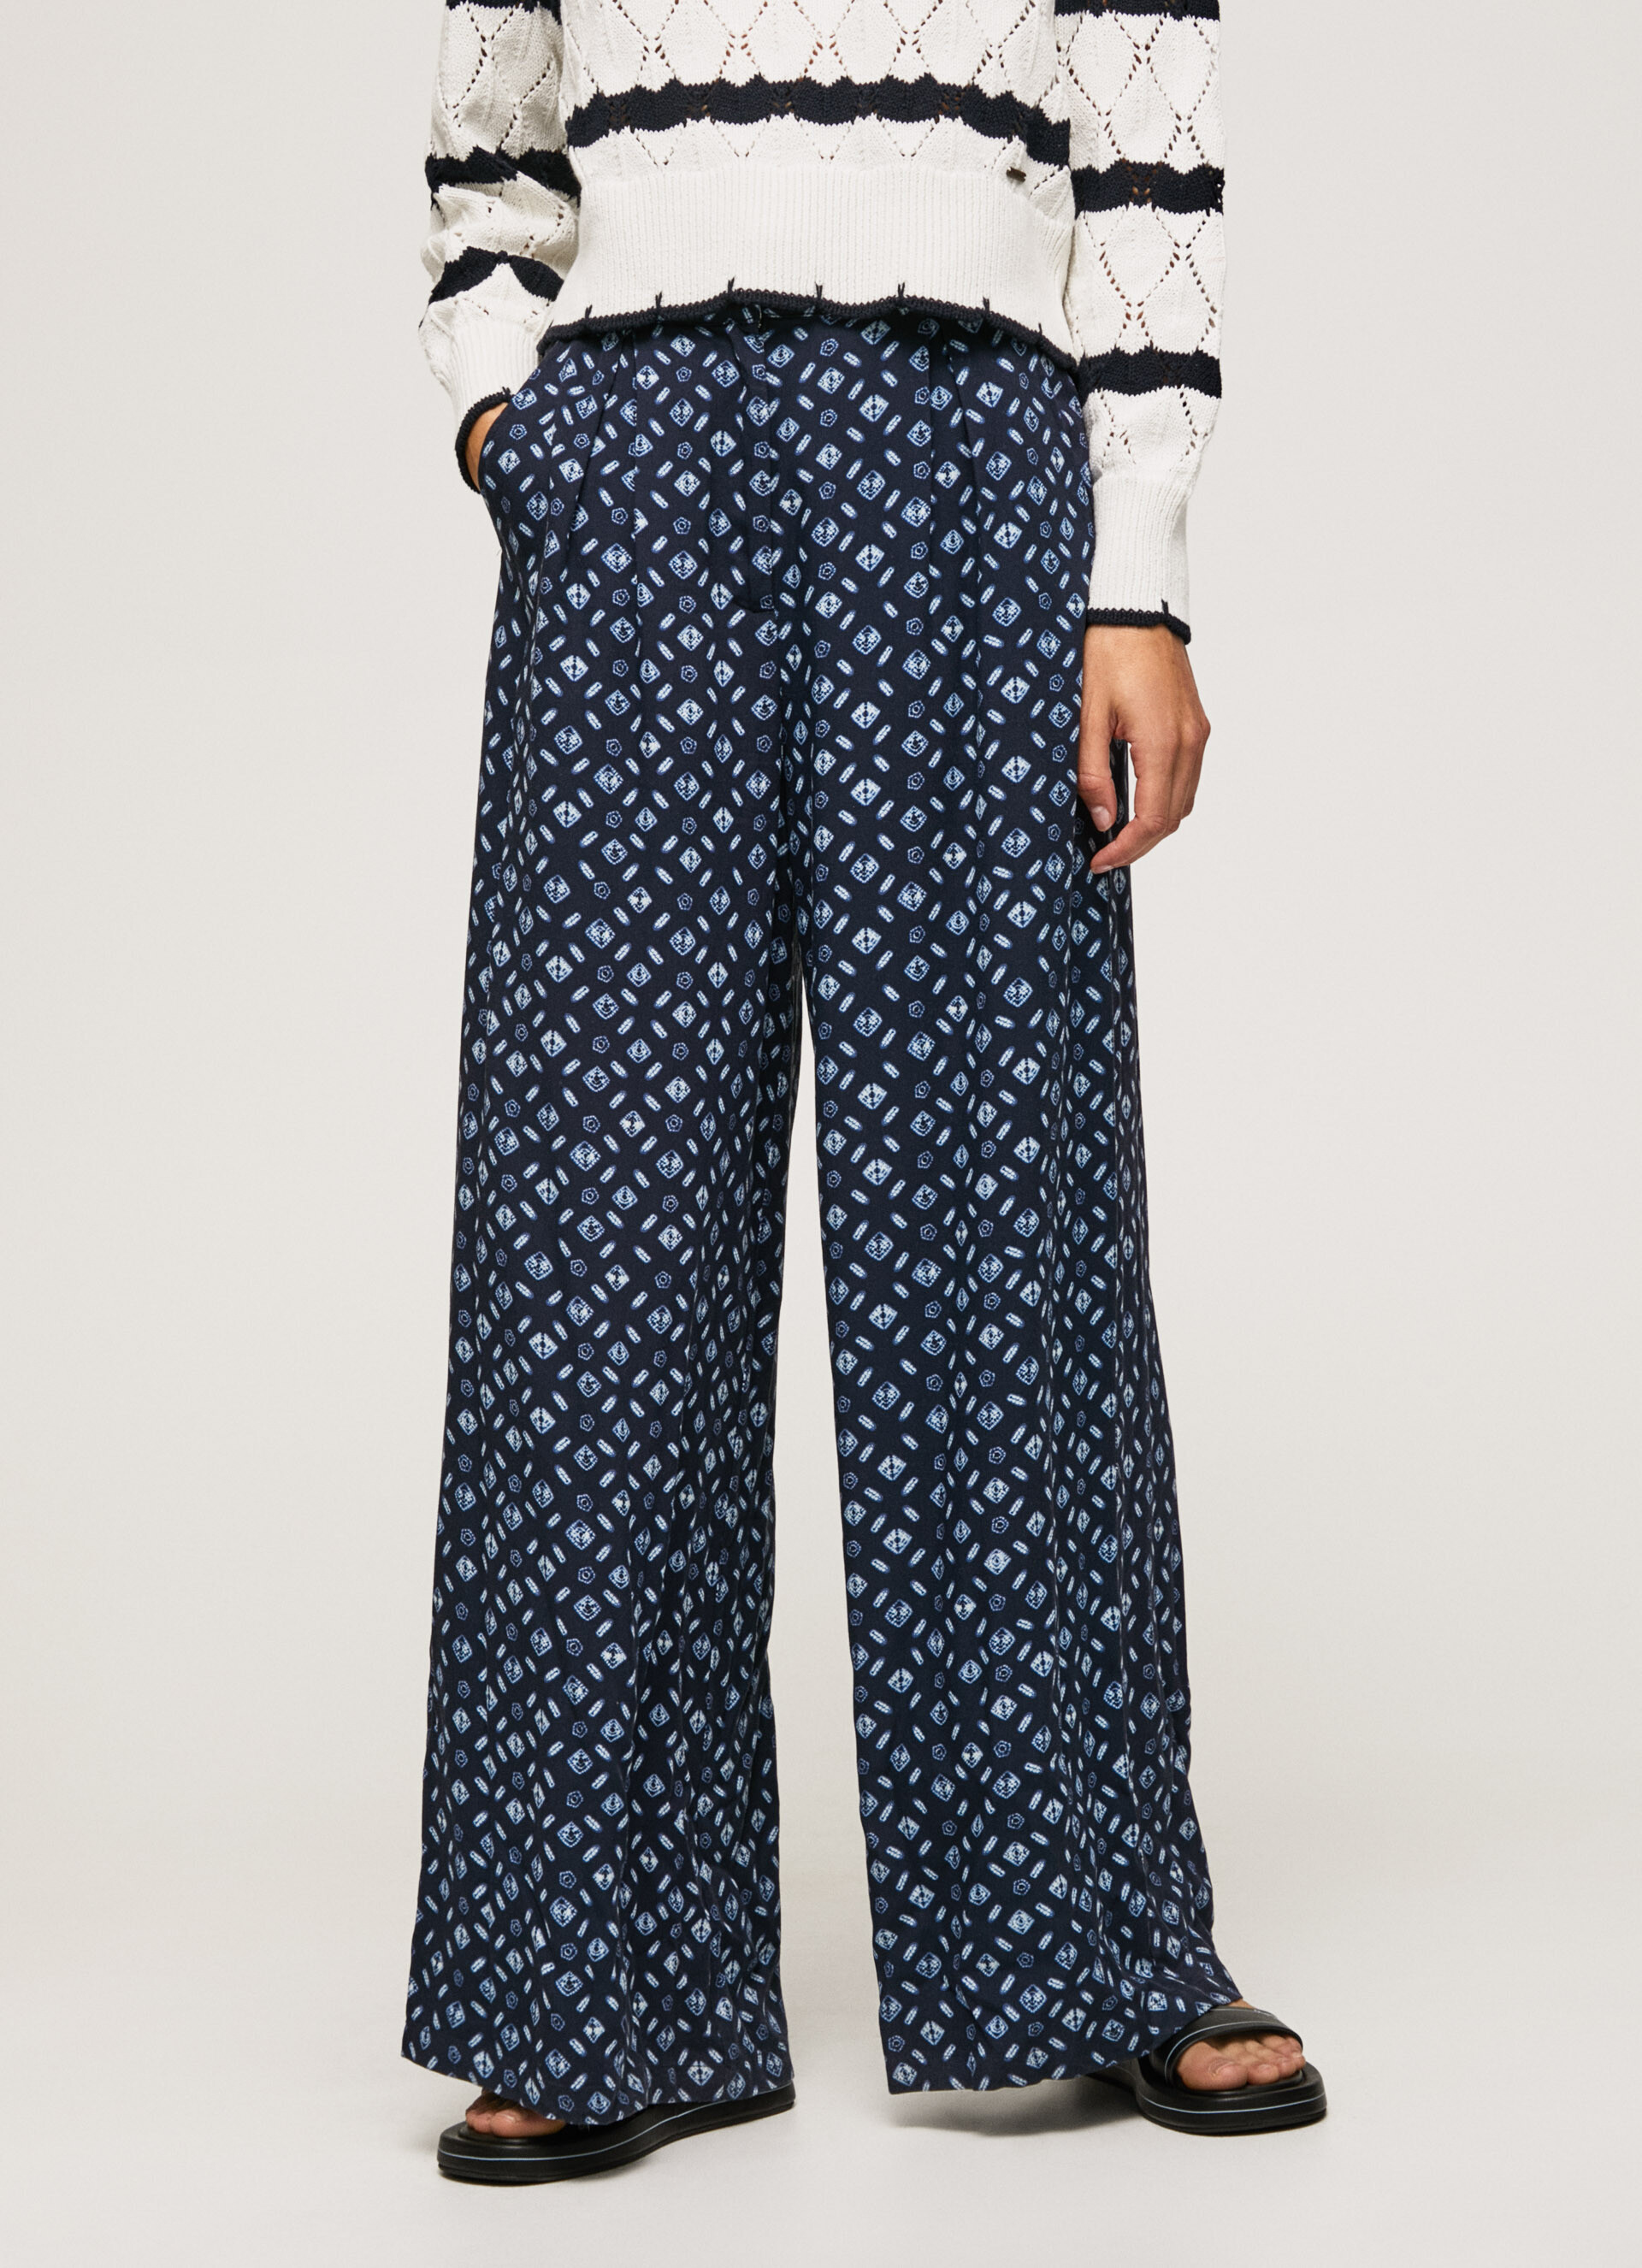 Pepe Jeans - Pants with print, Multicolor, large image number 3